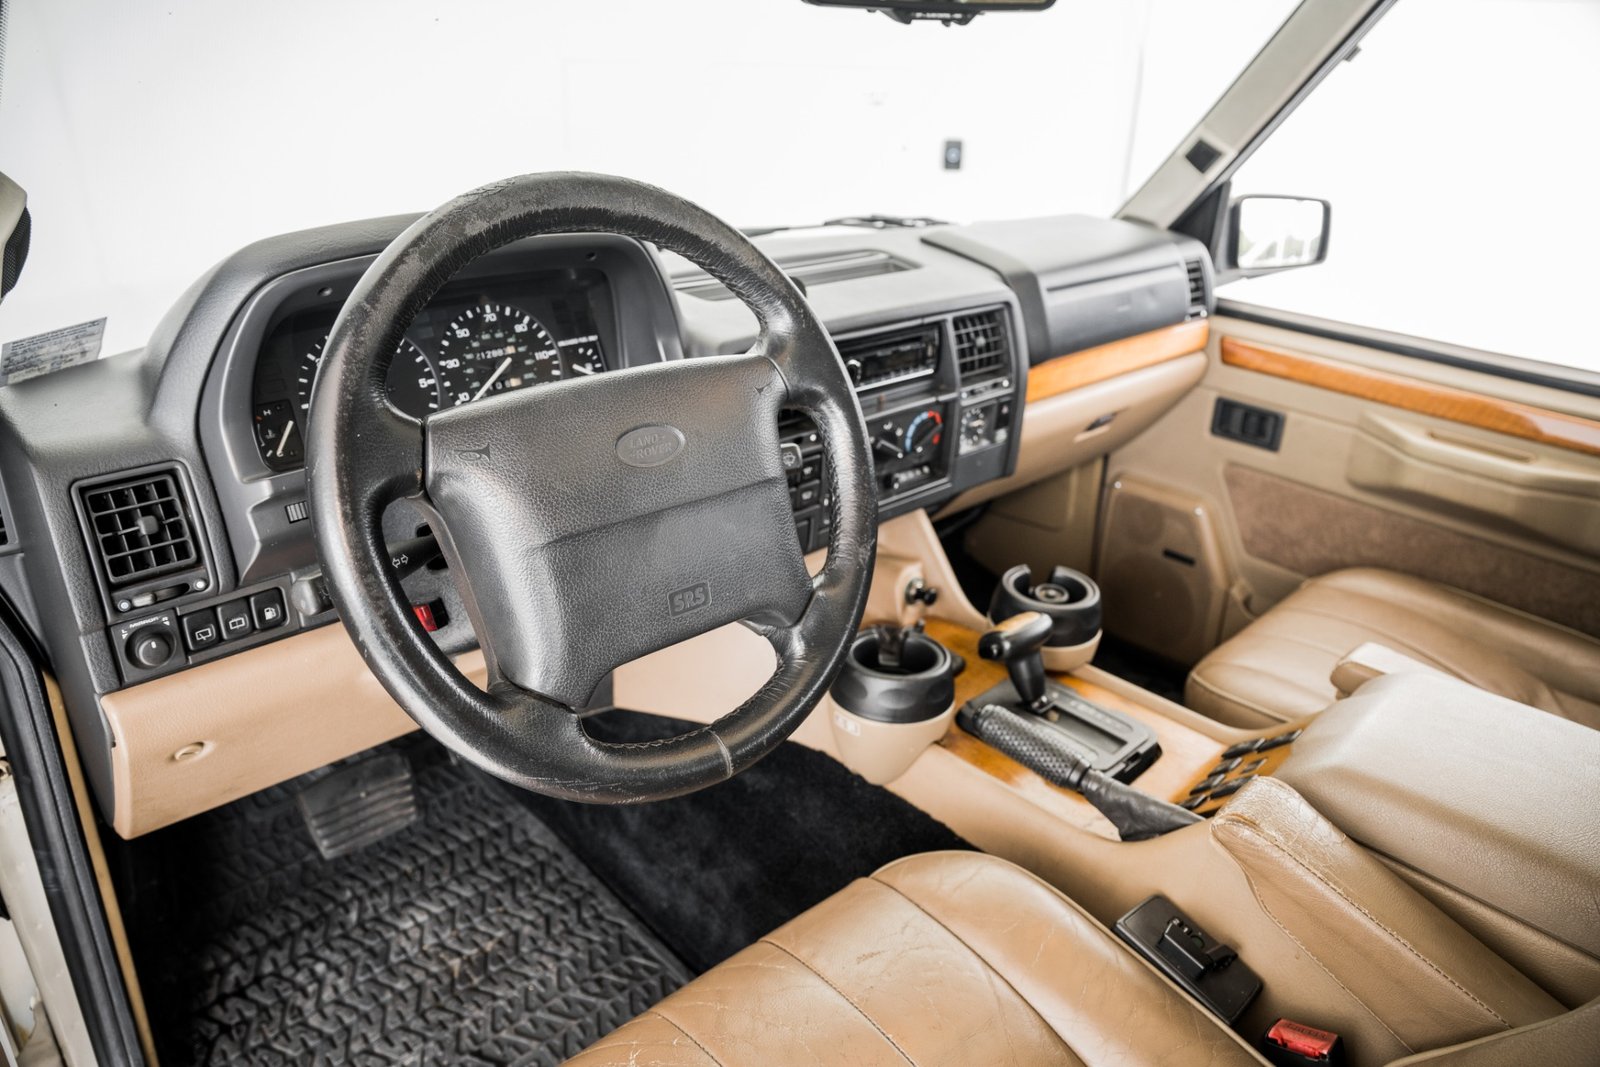 Used 1995 RANGE ROVER COUNTY CLASSIC (4)